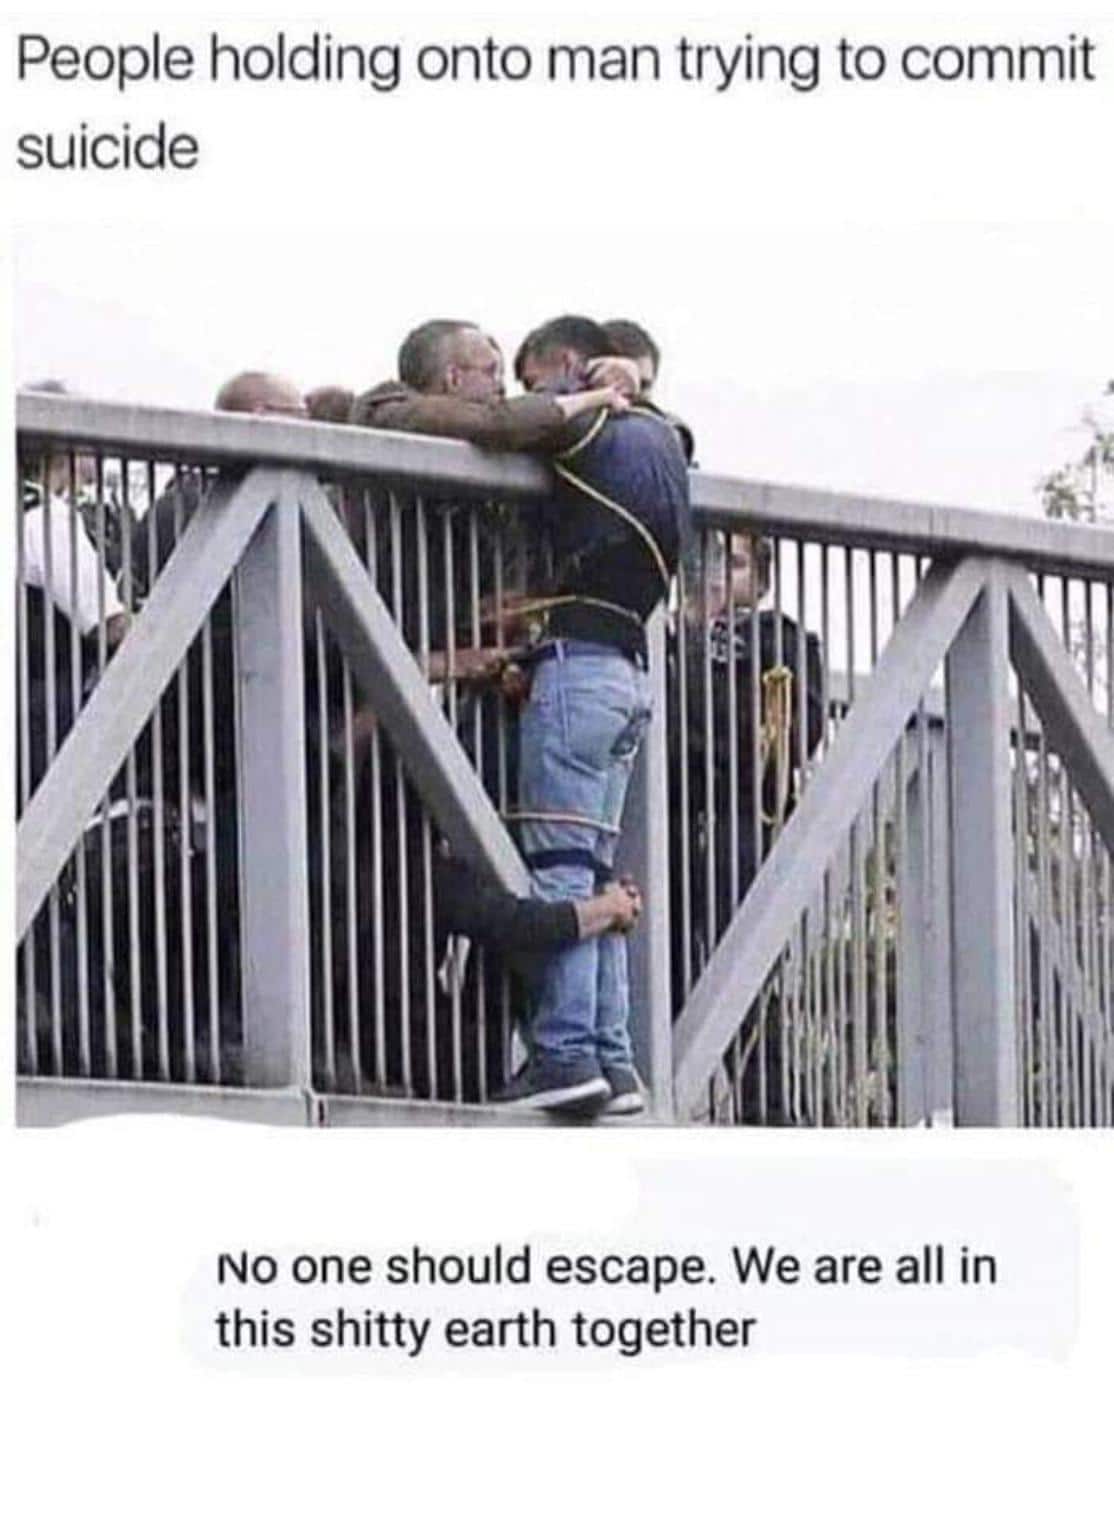 Dank, Finding other memes Dank, Finding text: People holding onto man trying to commit suicide No one should escape. We are all in this shitty earth together 